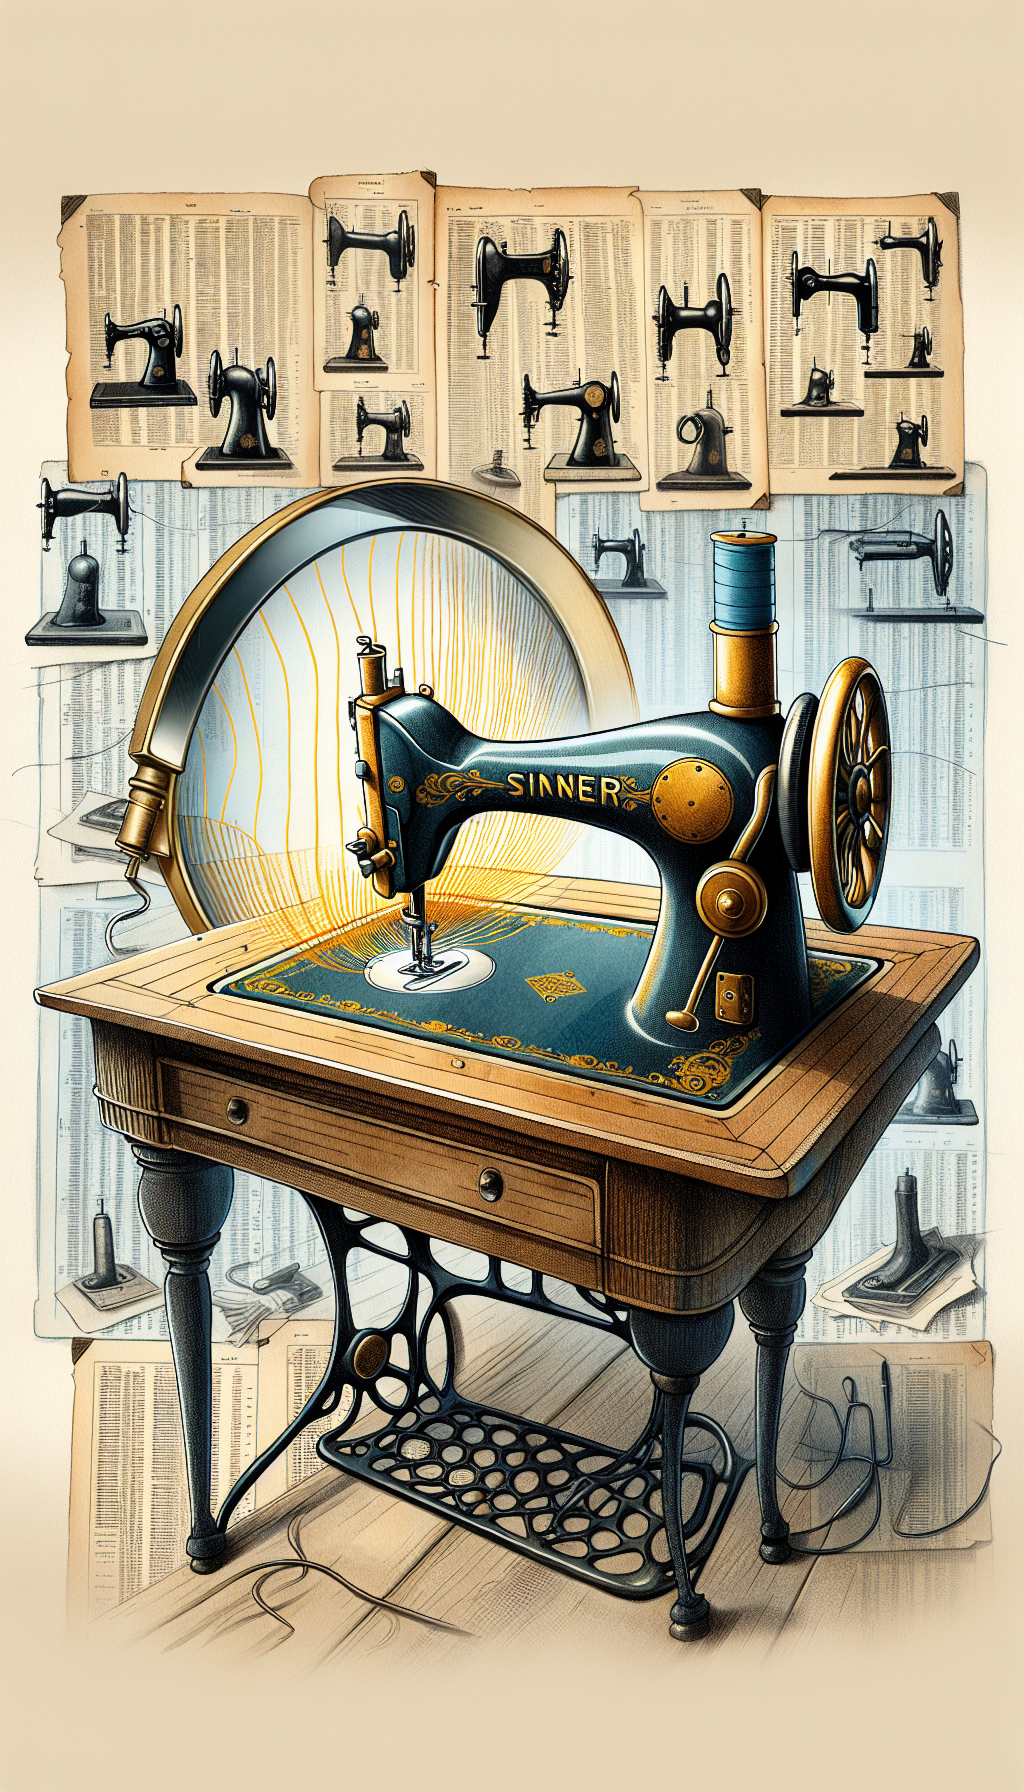 An antique Singer sewing machine morphs into a detective, with a magnifying glass examining its serial number, against a backdrop of a vintage catalog listing models and rarities. The table radiates golden lines to signify value, blending into an auction hammer about to strike. Sketched, watercolor, and vector elements create a dynamic, visually diverse scenery.